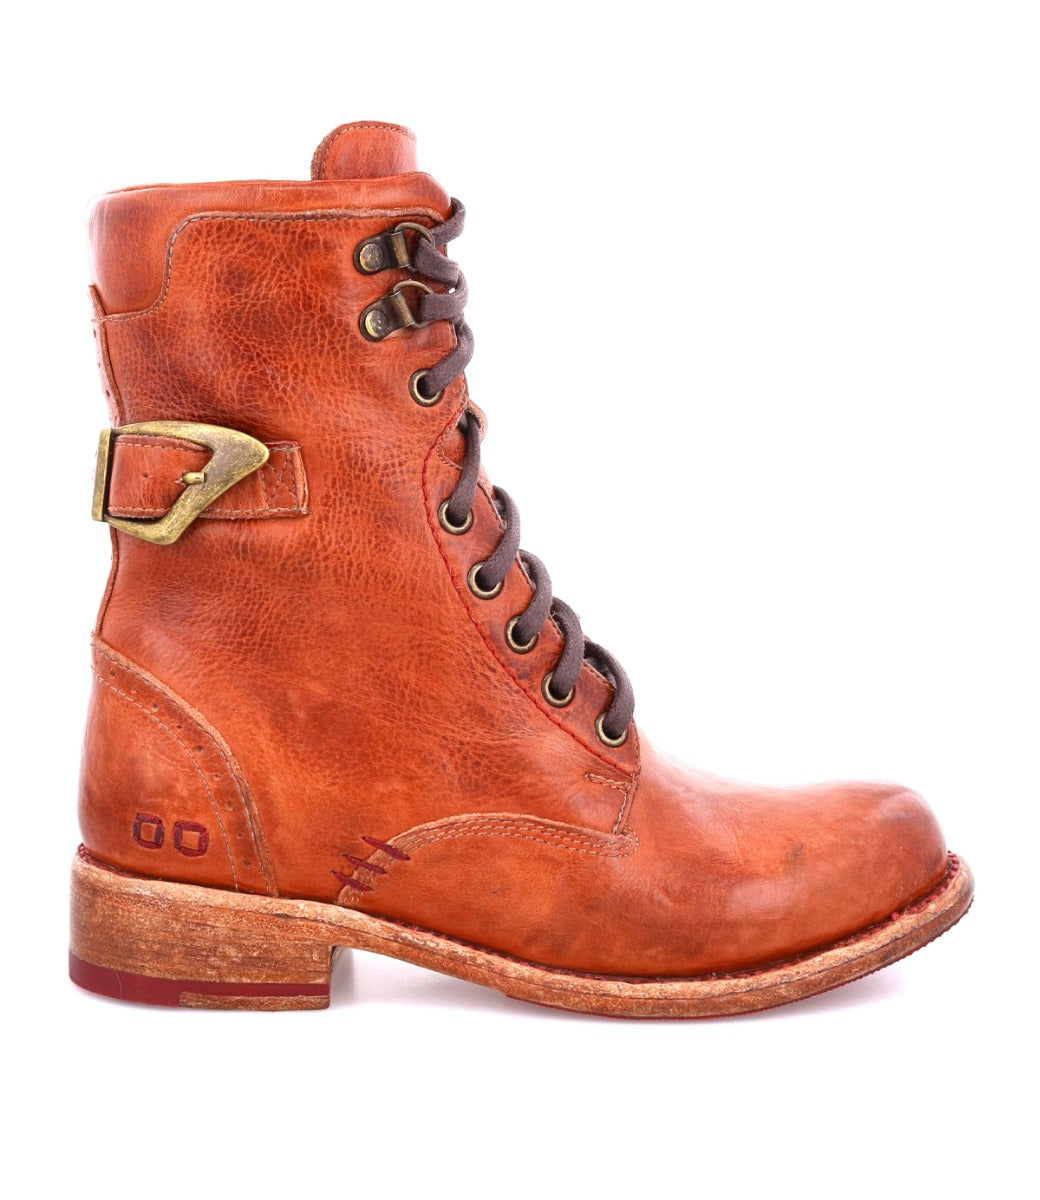  Bed Stu women's leather boot with a metal buckle.